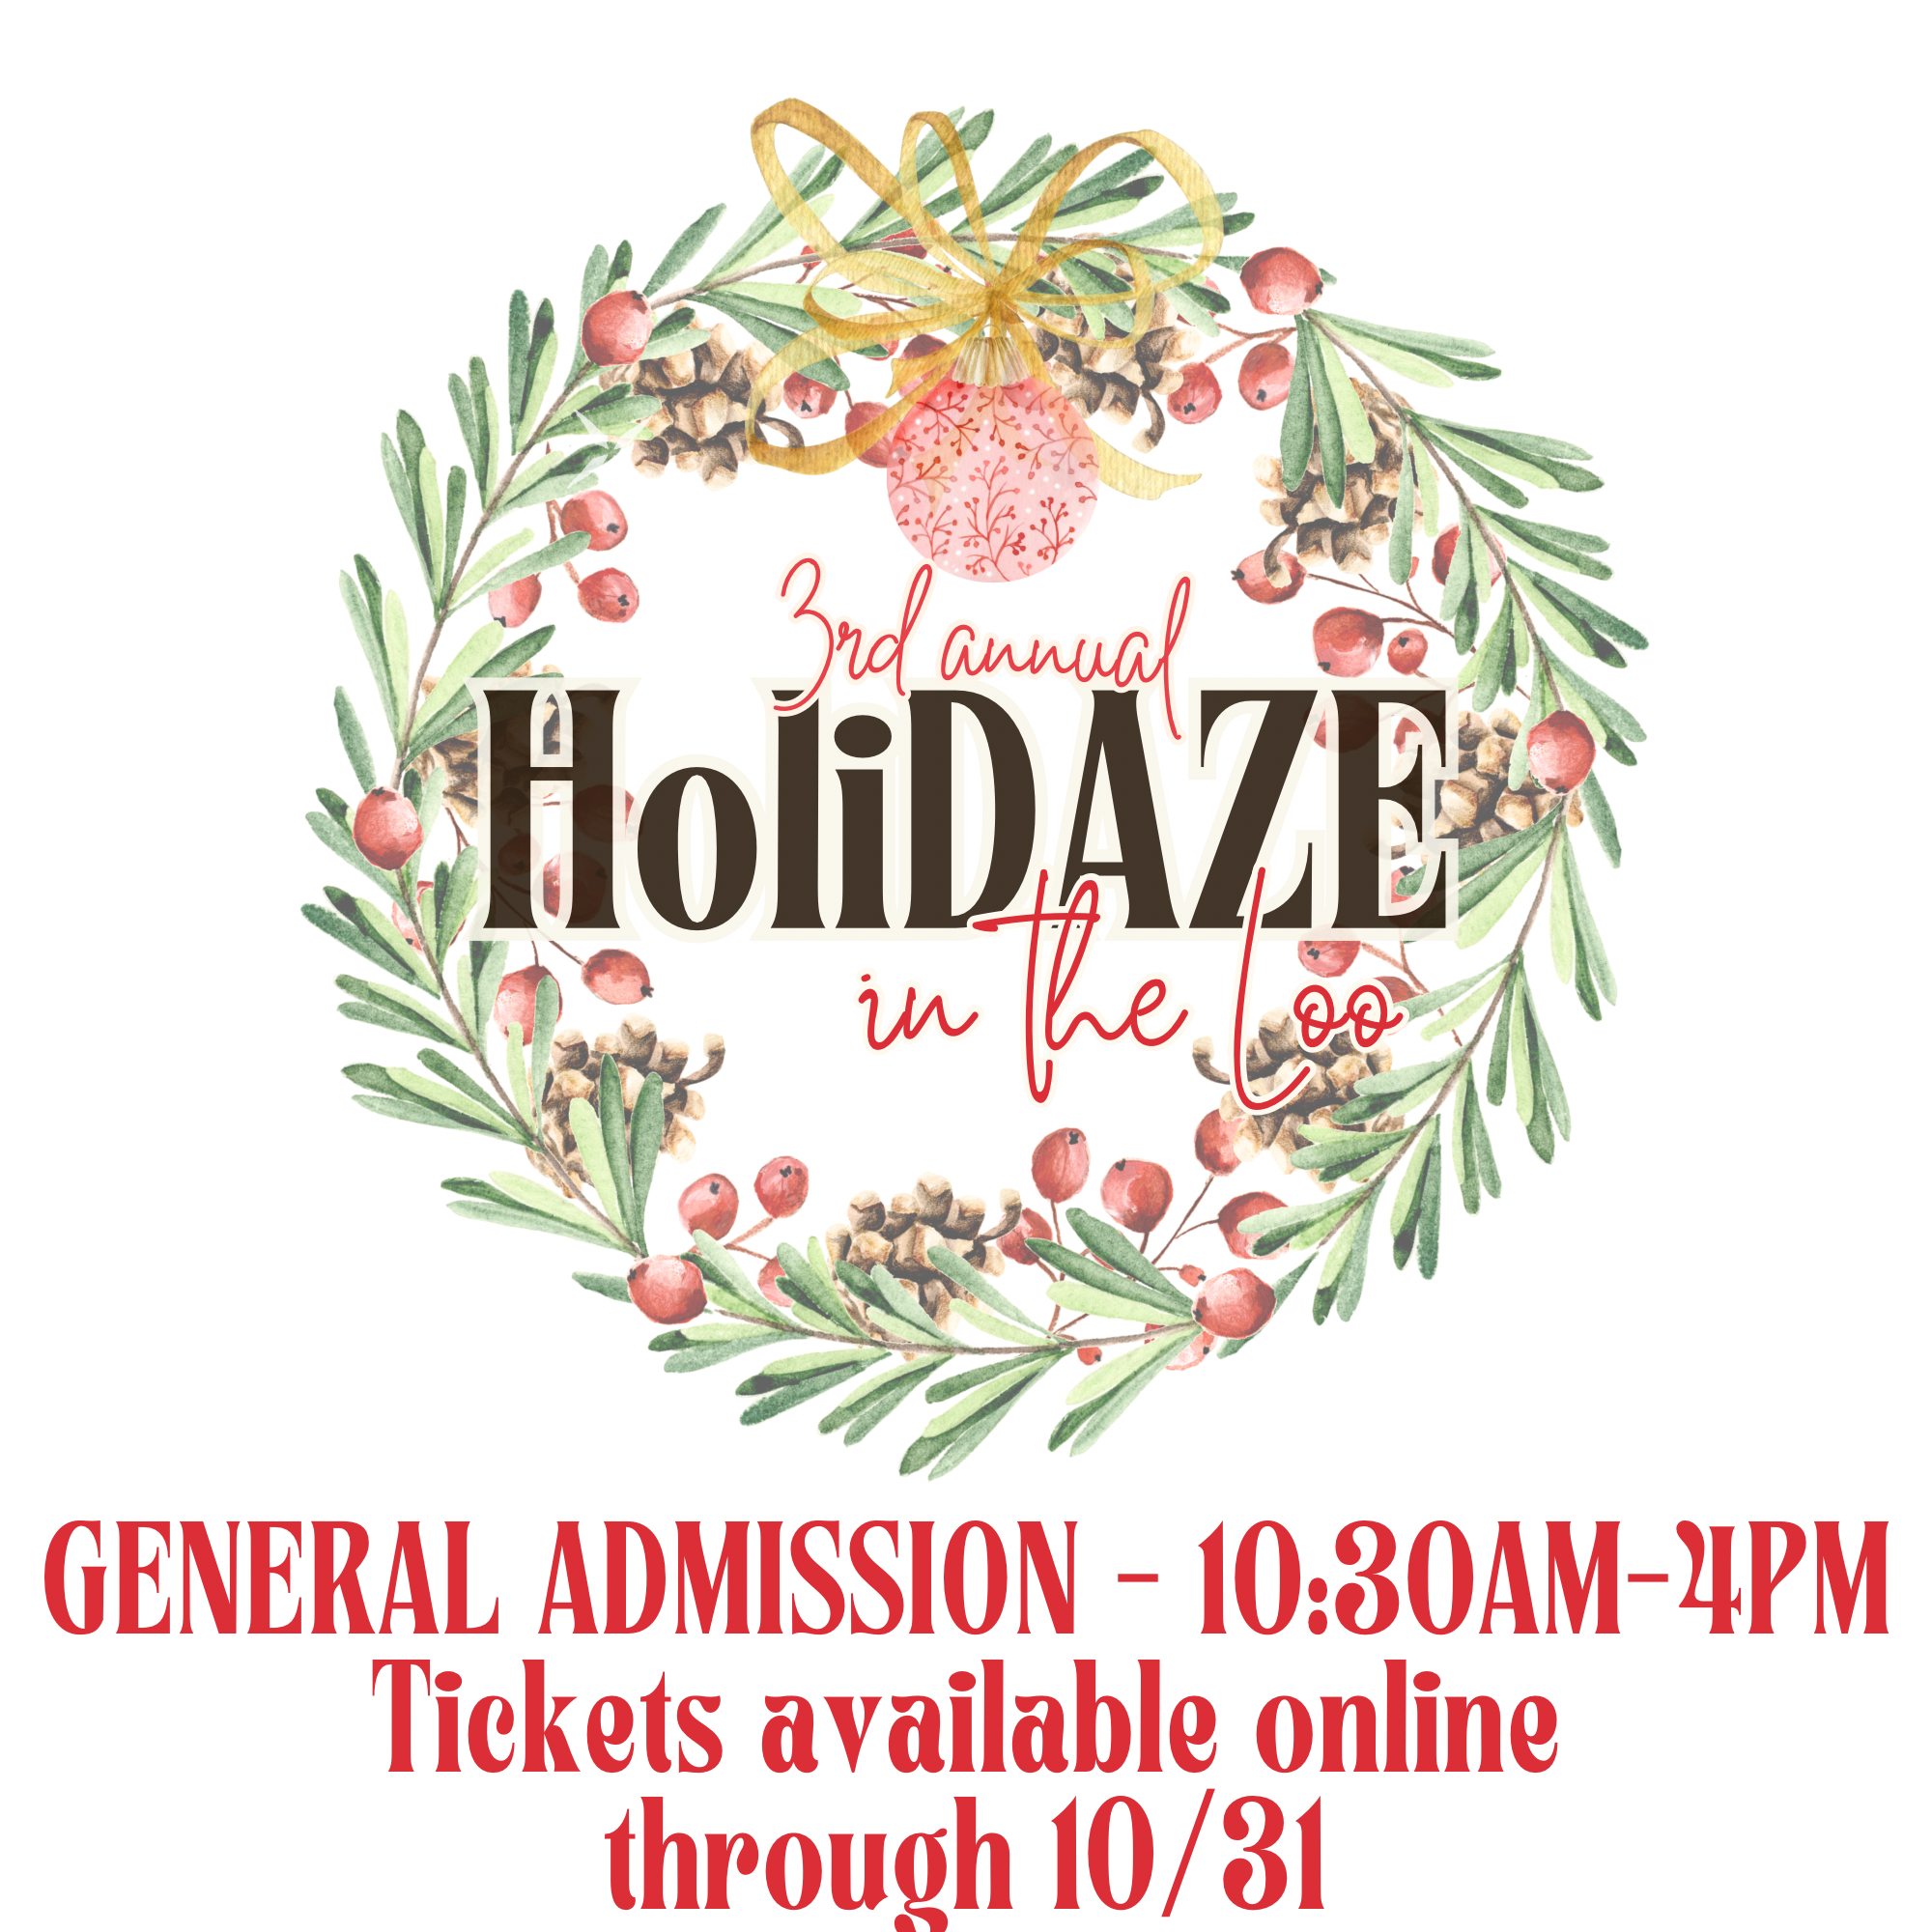 3rd Annual HoliDAZE - General Admission Advance Purchase